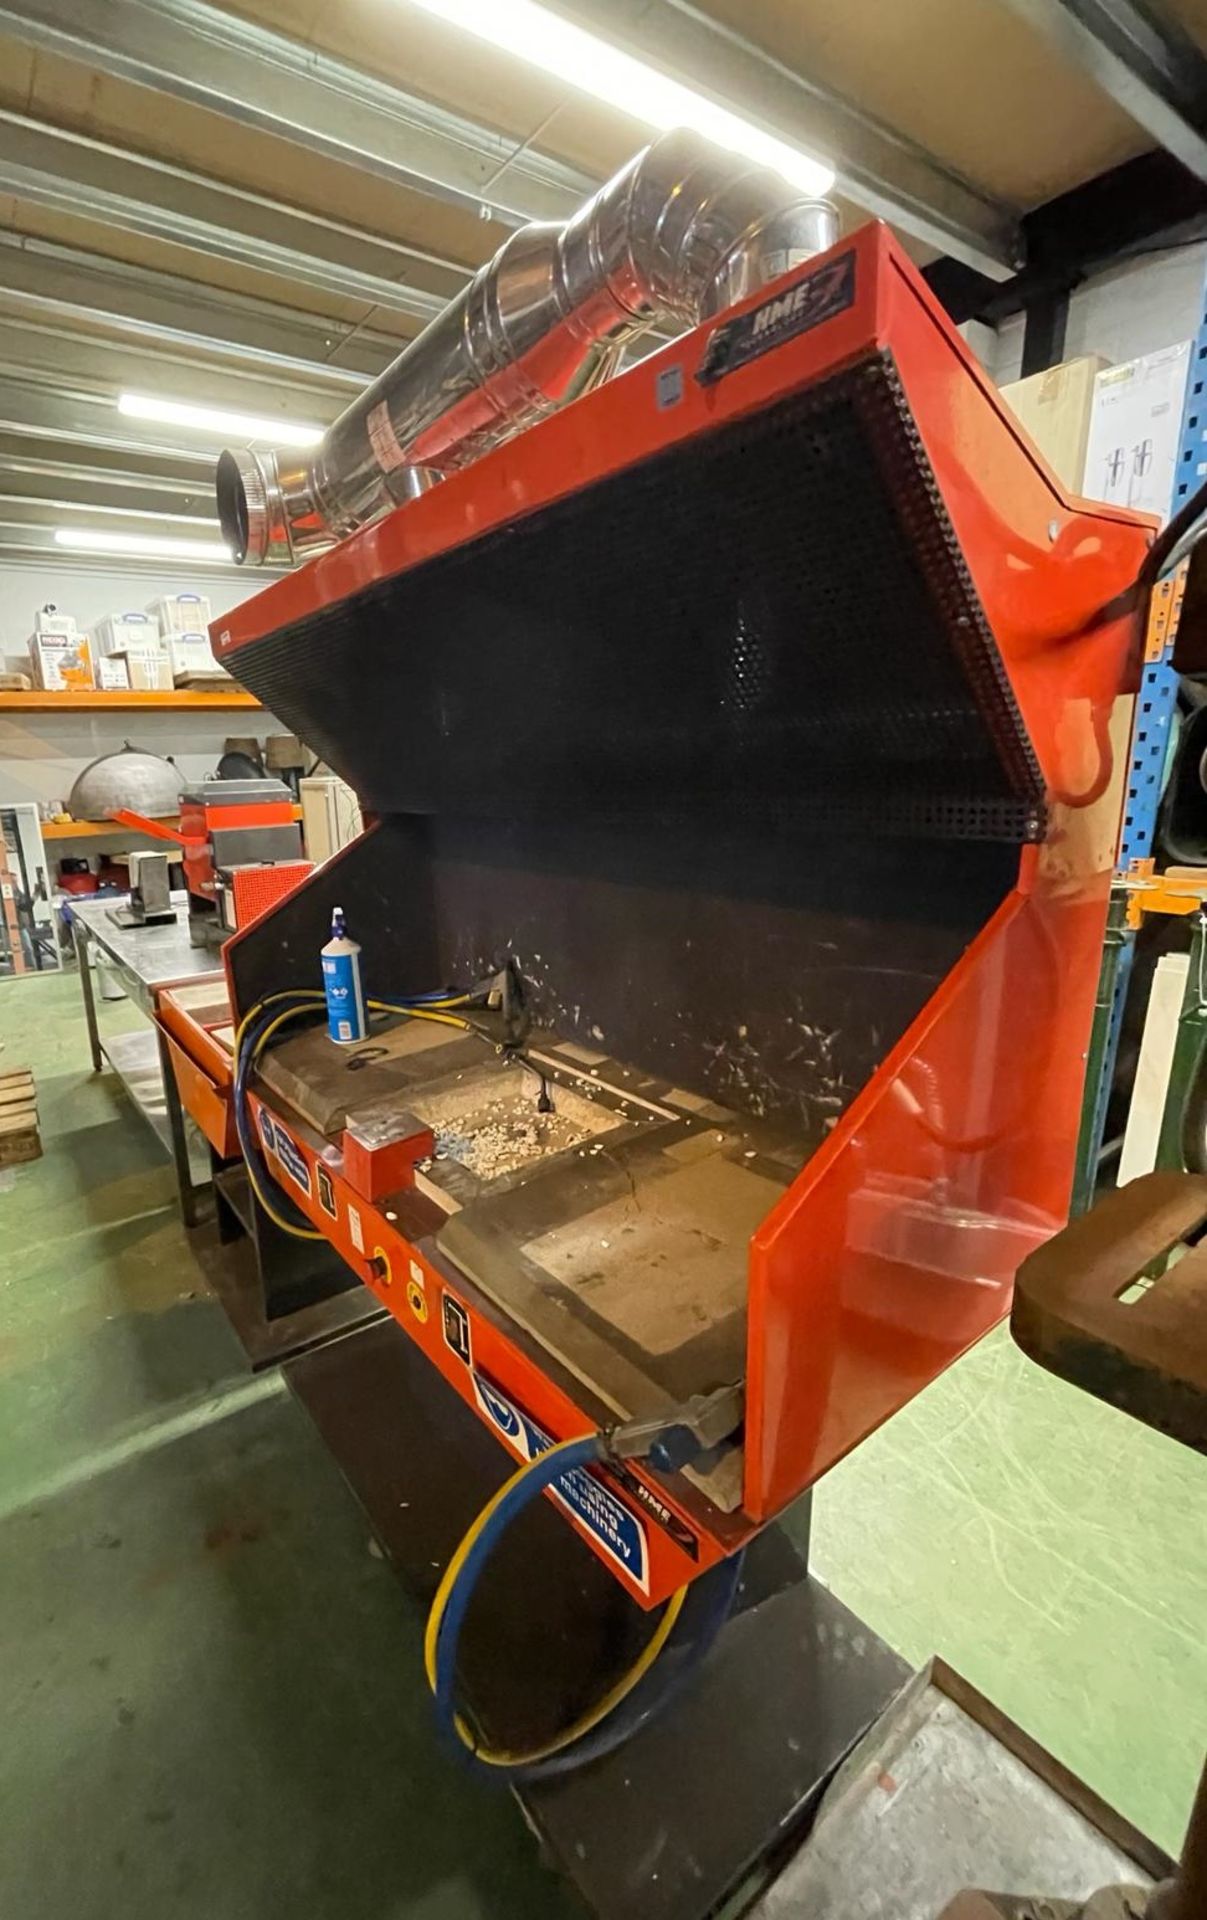 1 x Double Brazing Hearth and Alumina Chip Forge - Treatment Unit for Joining of Metal - RRP £7,800 - Image 10 of 12